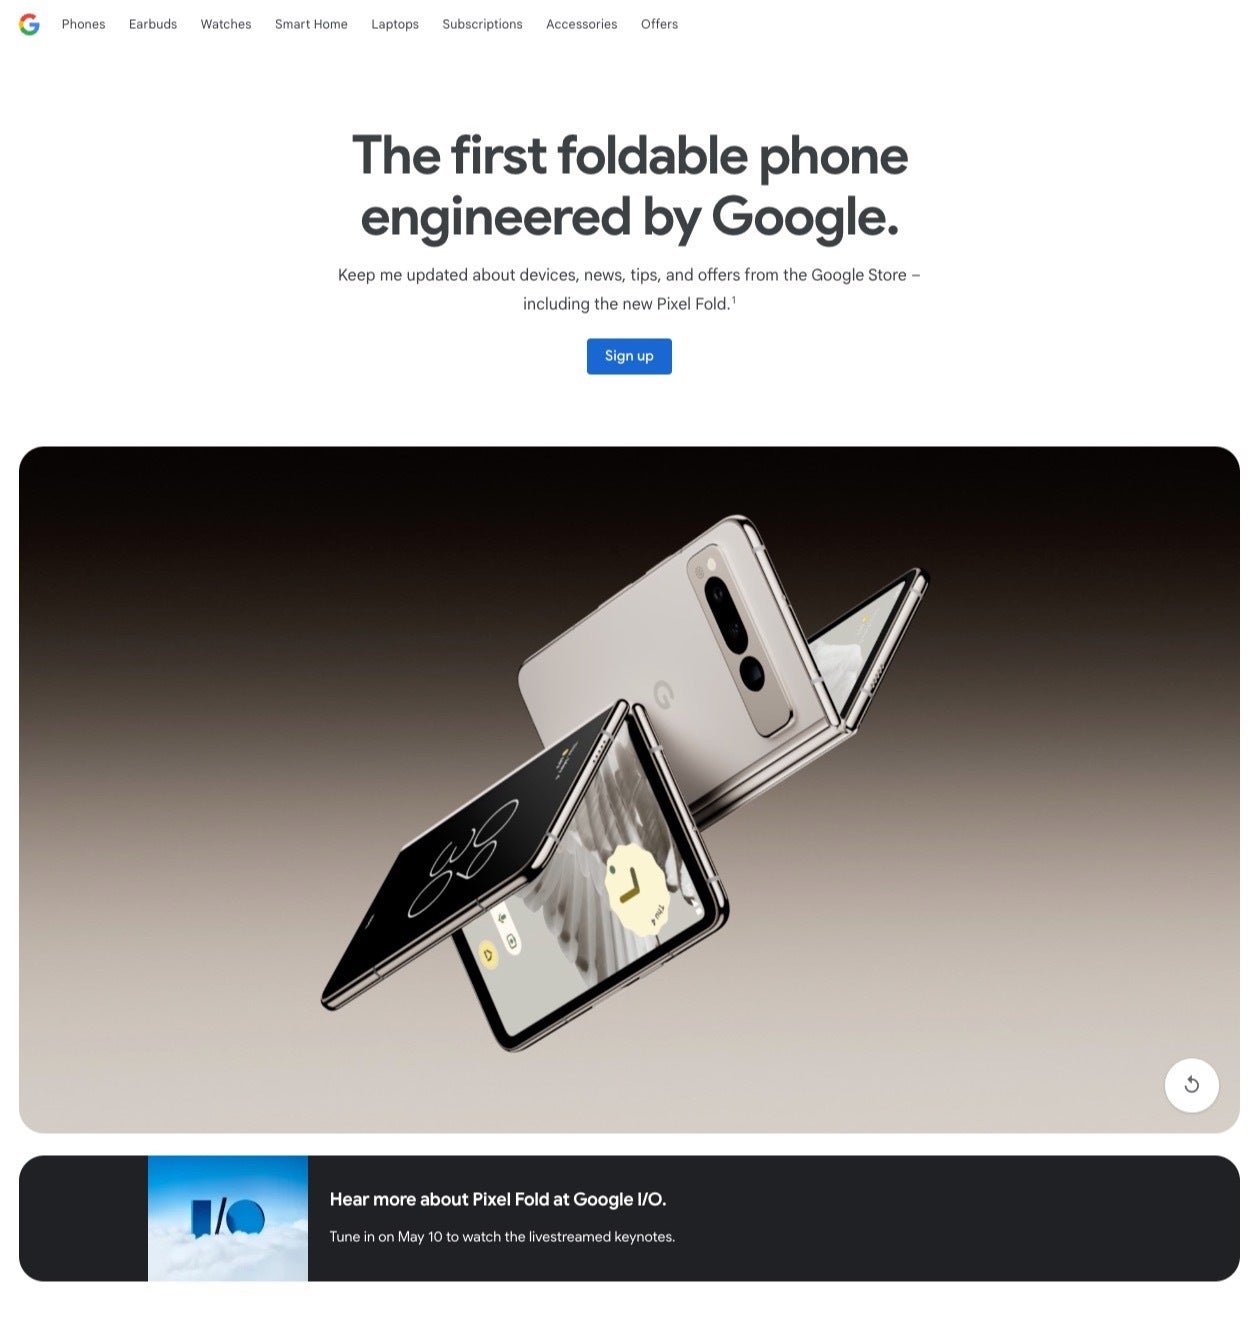 Google officially teases Pixel Fold to be unveiled at Google I/O on May 10th